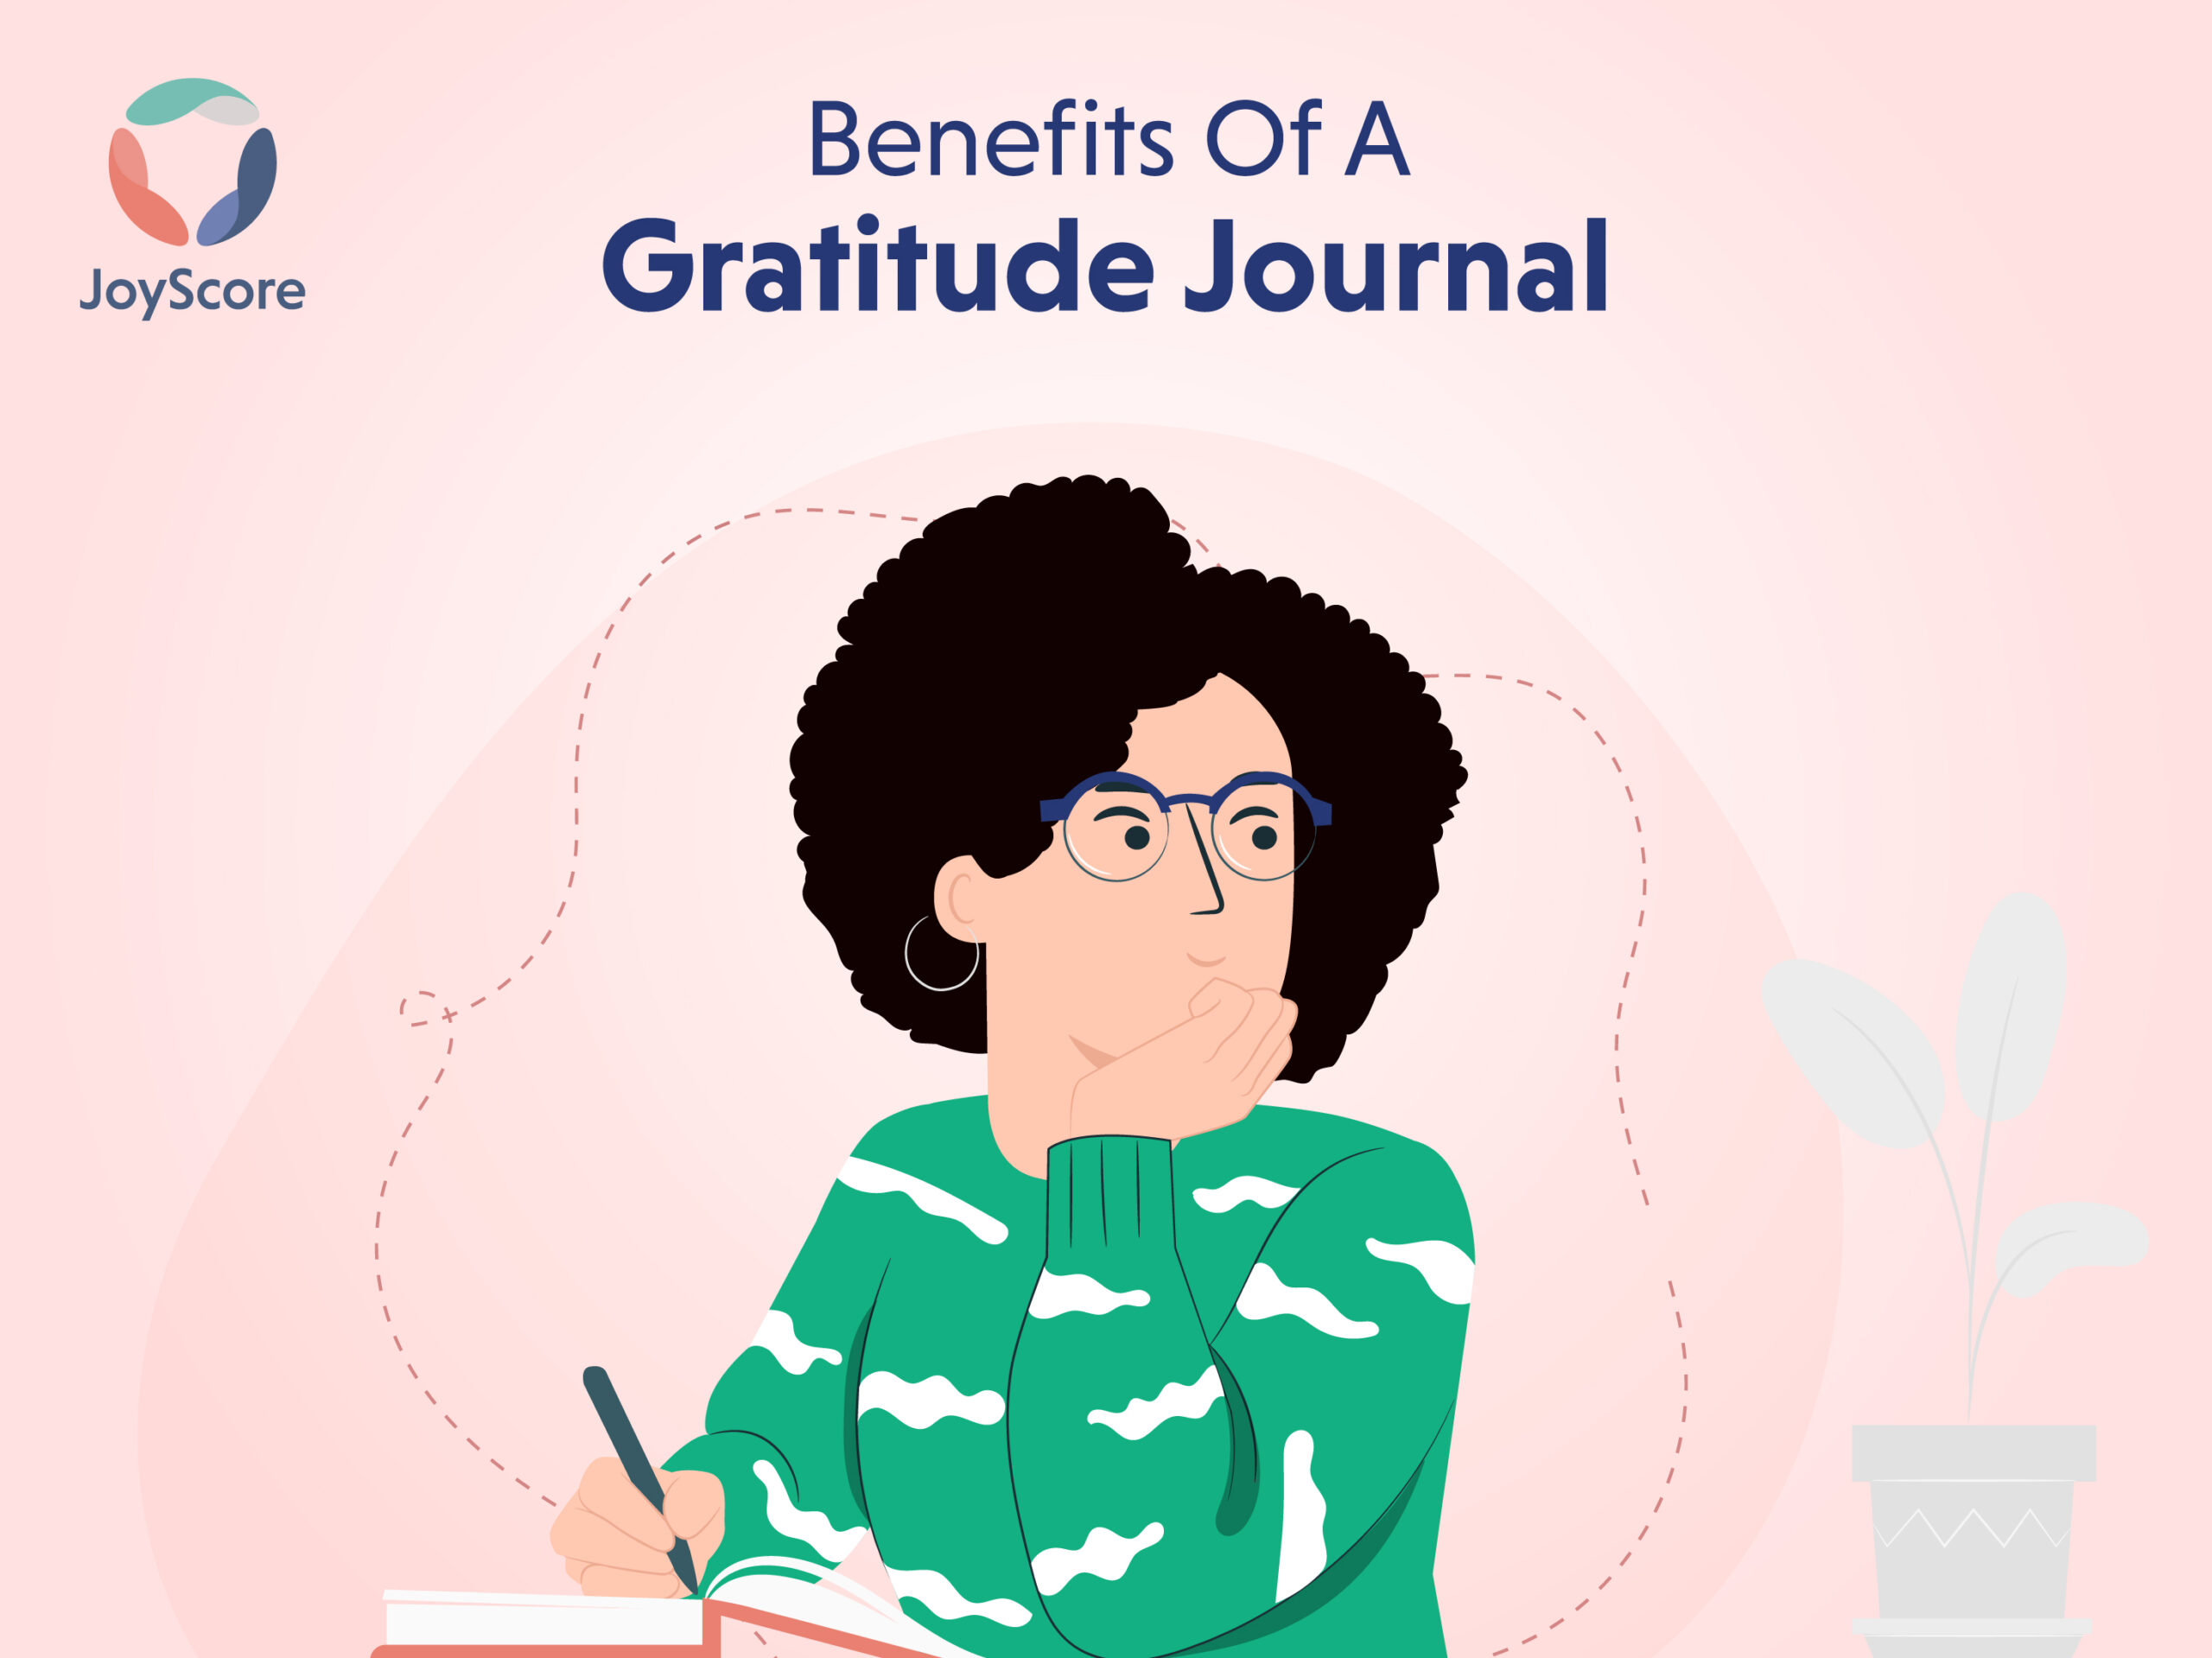 5 Awesome Benefits Of A Gratitude Journal